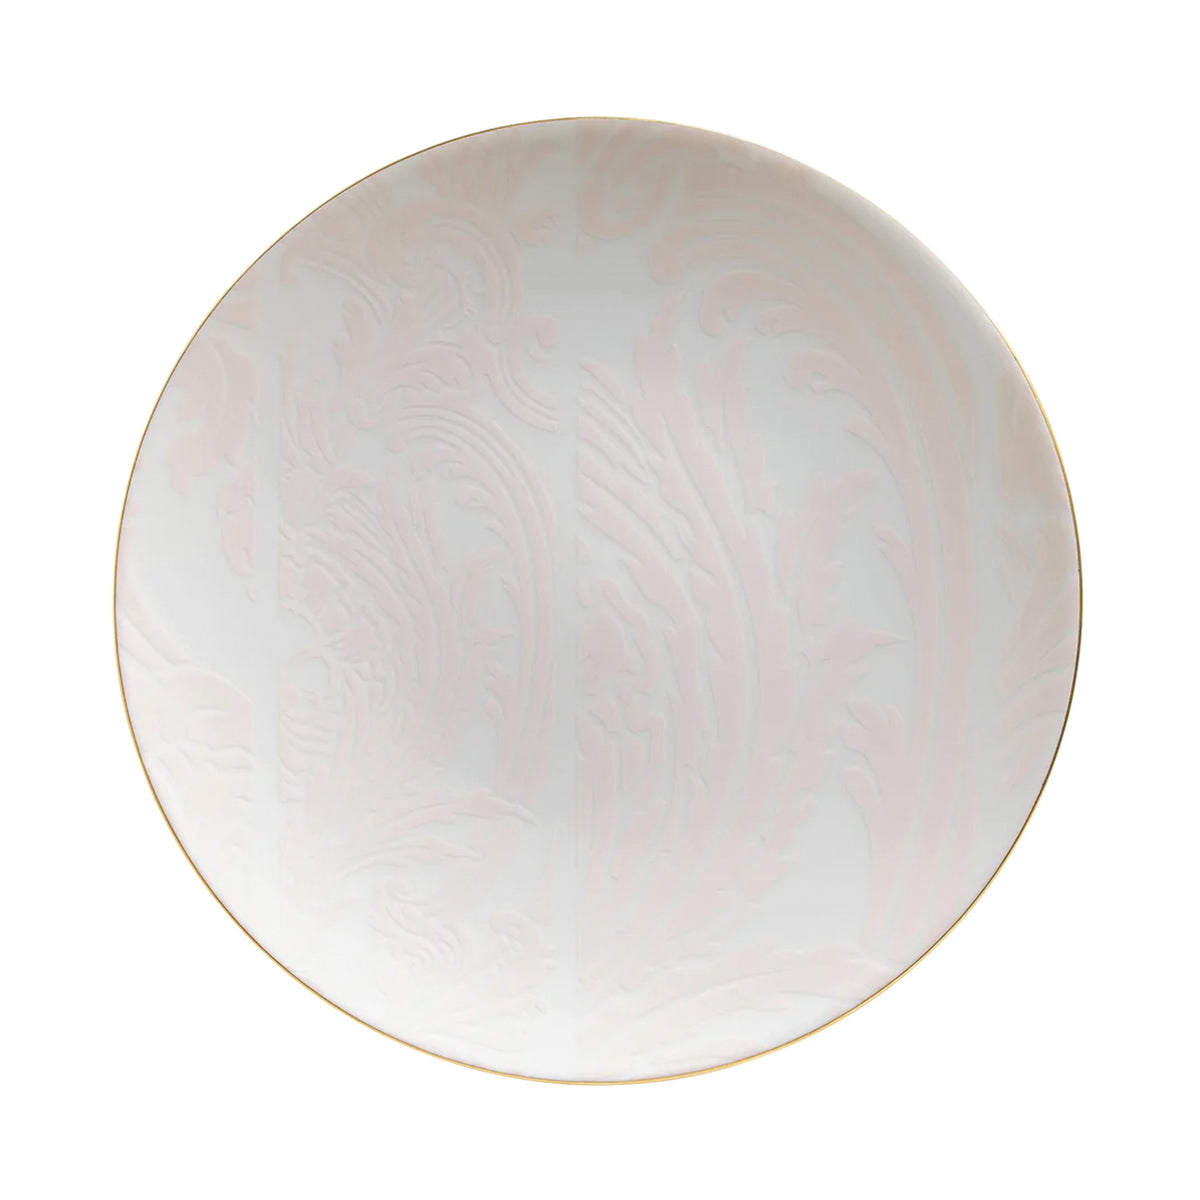 INDIAN POWDERED PINK GOLD NET - 29 cm plate